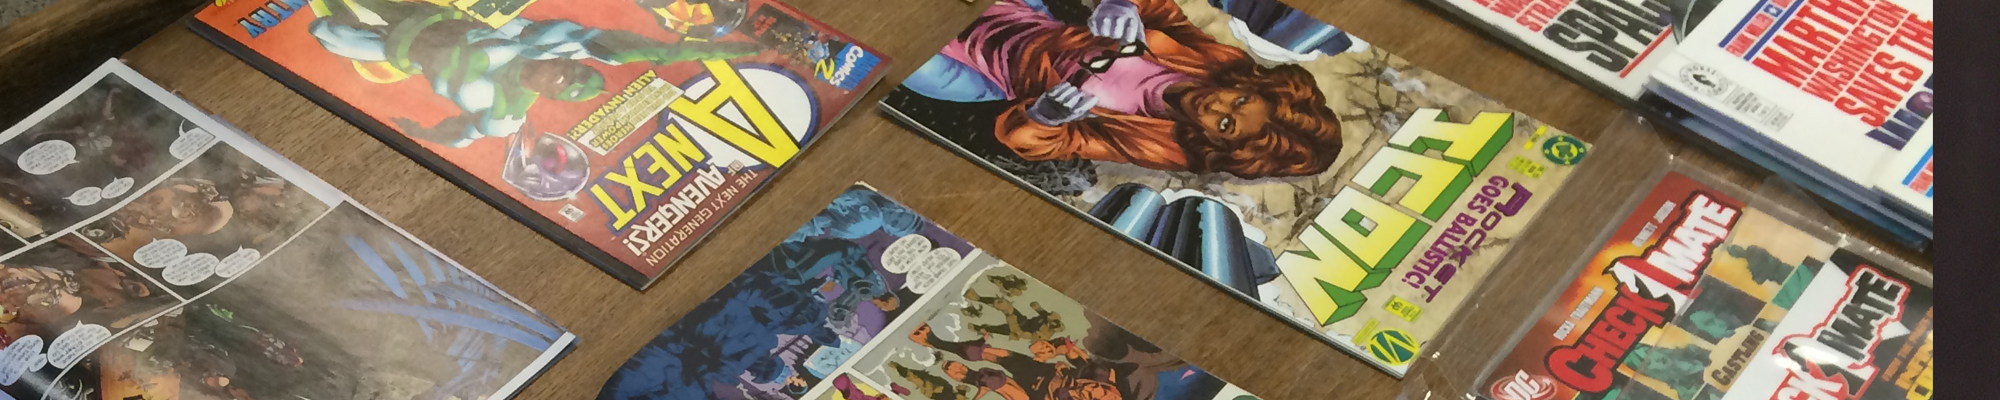 comics on table from library collection